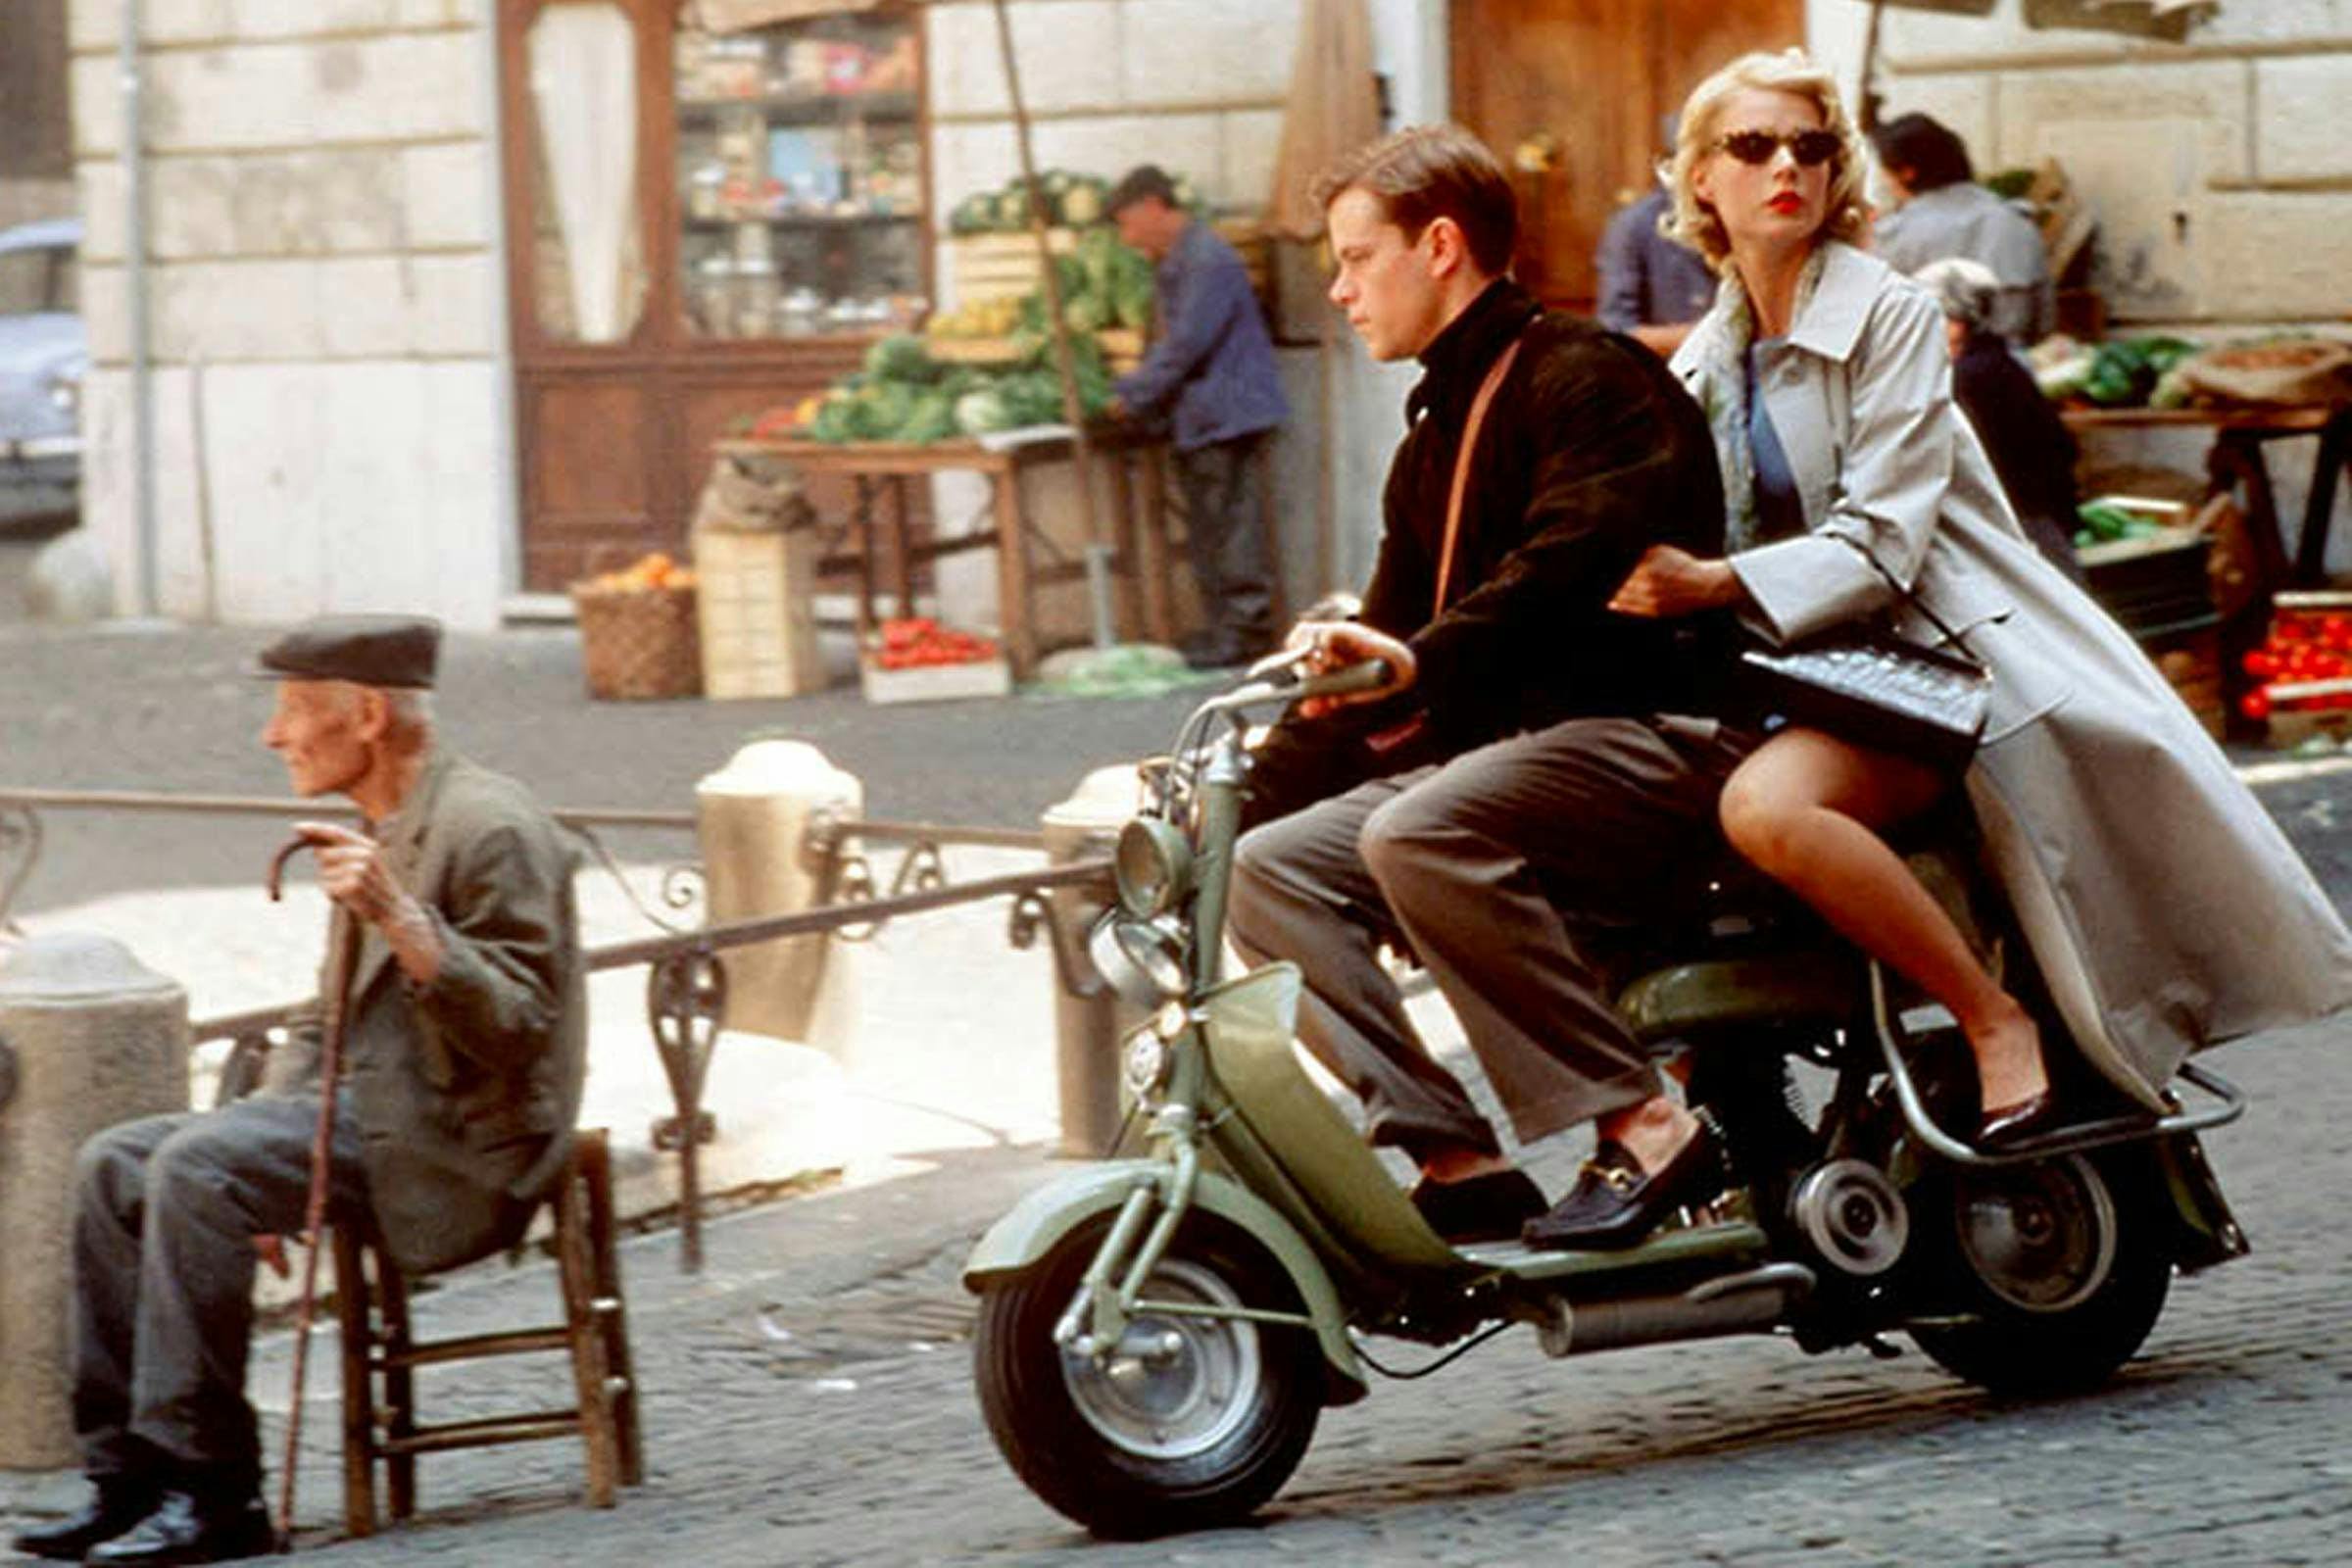 A woman and man riding a motor scooter on the streets of Italy.